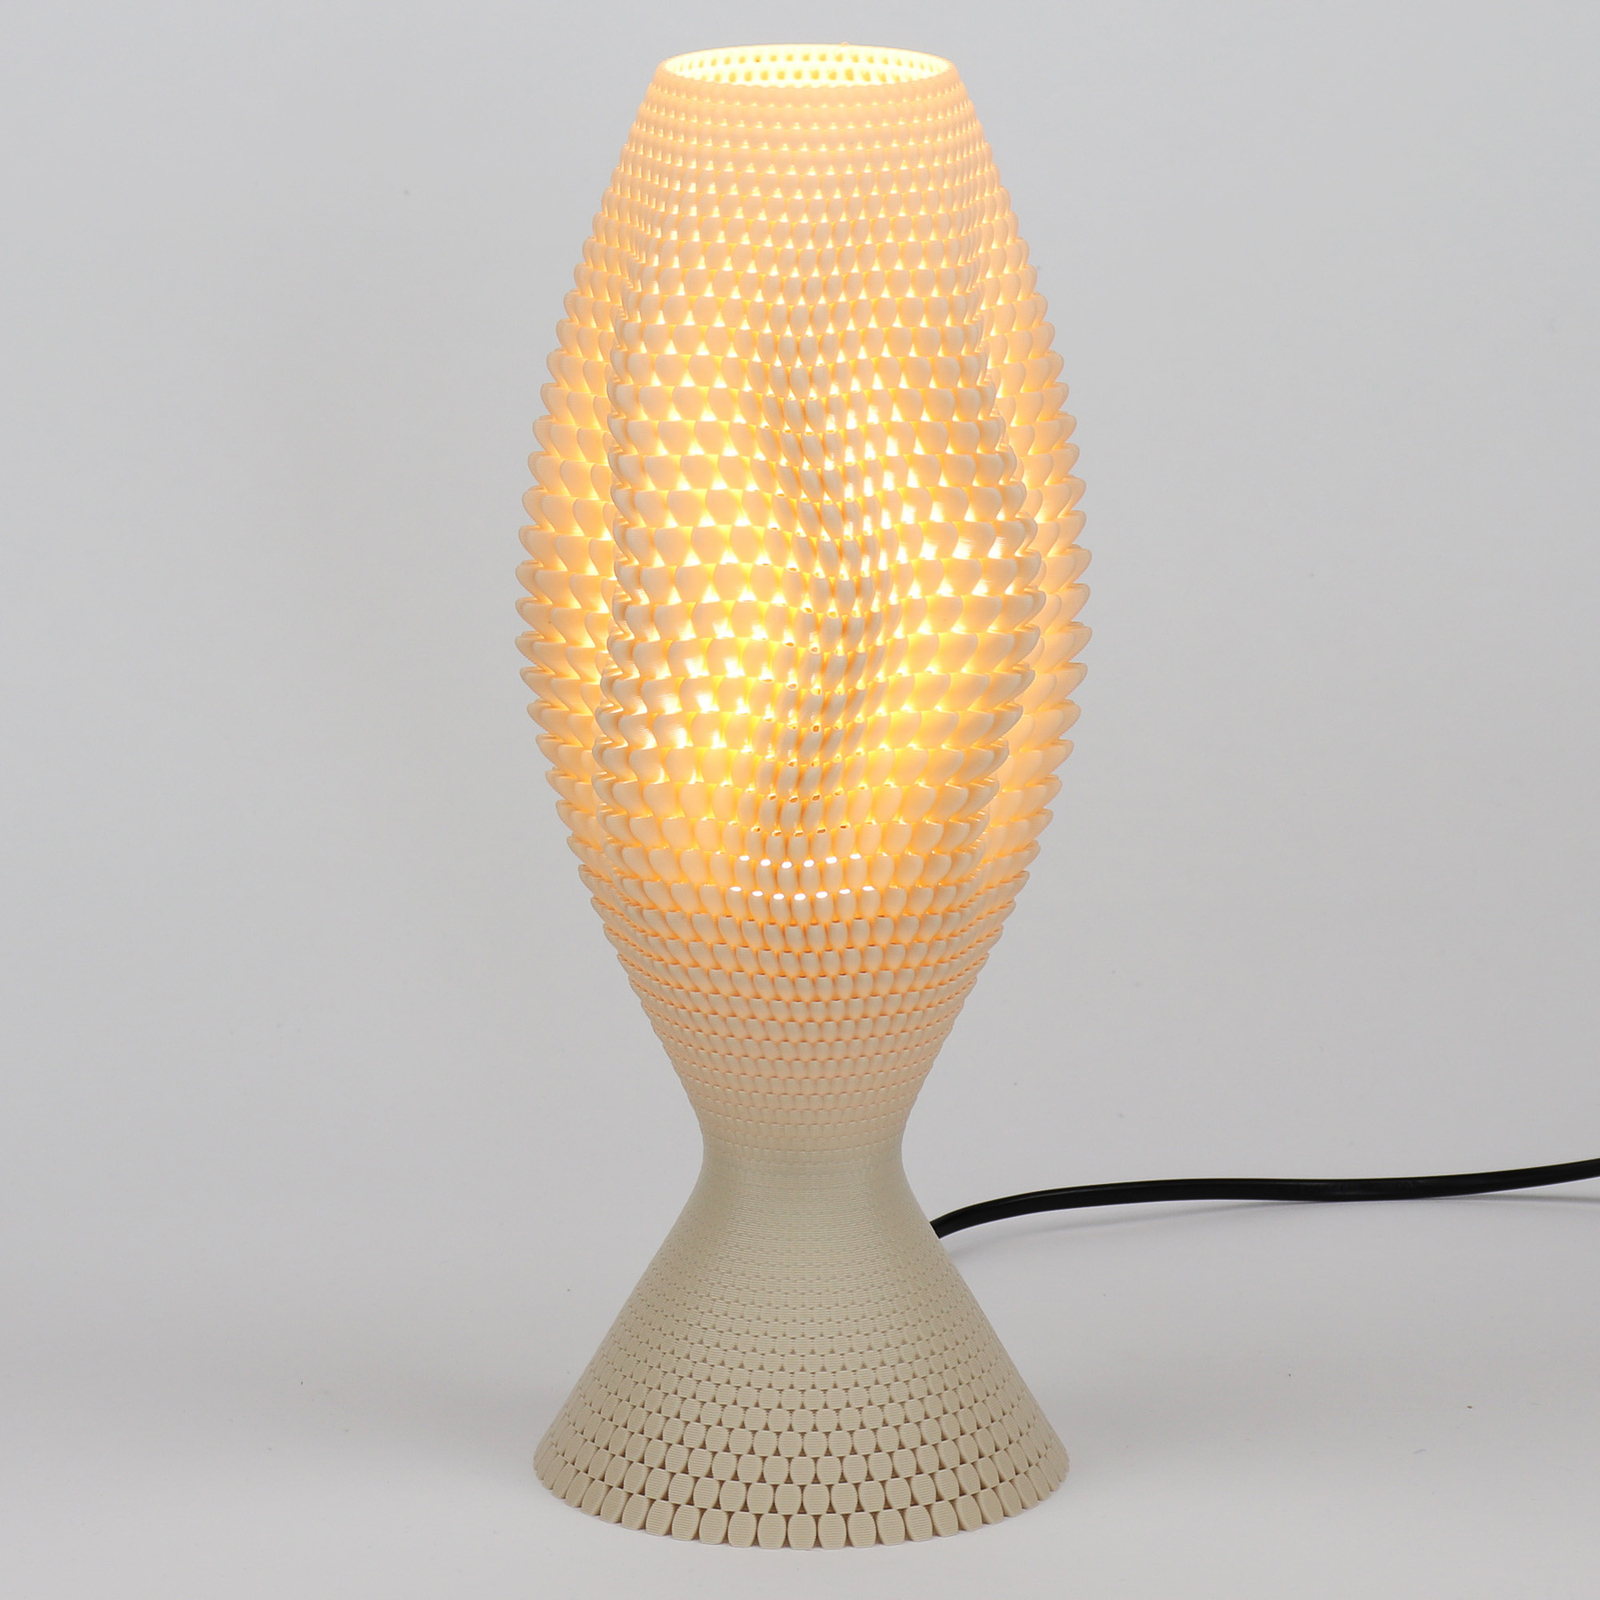 Koral table lamp made of organic material, Lines, 33 cm